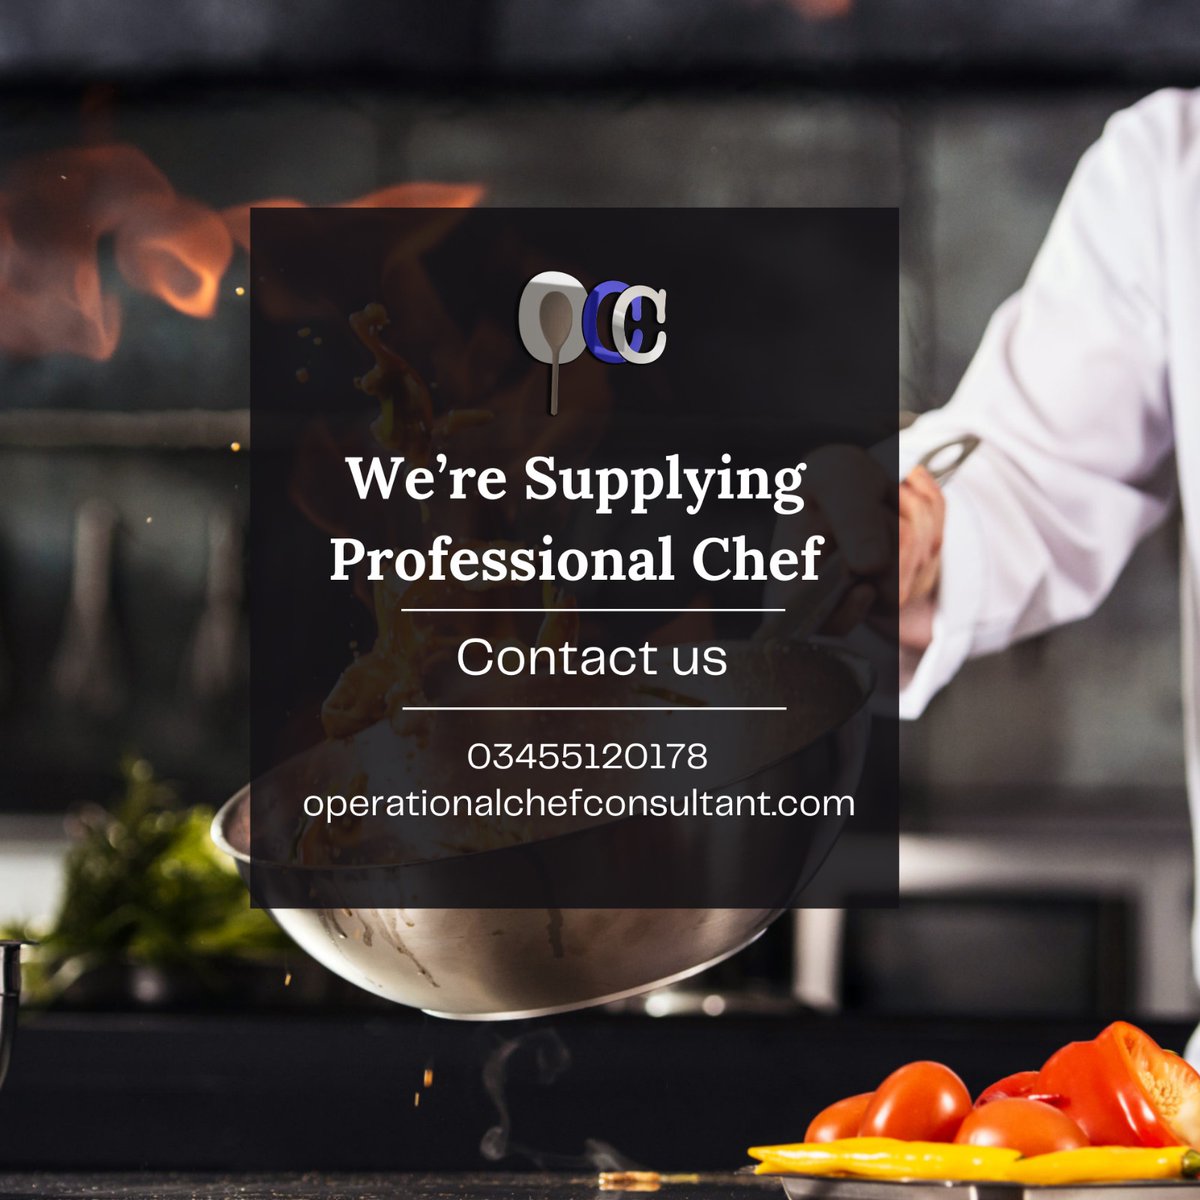 Experience culinary excellence with our team of professional chefs, delivering unparalleled taste and innovation.
*
Contact Us:
☎ 03455120178
🌐operationalchefconsultant.com
*
#ChefSuppliers #GourmetCuisine #CulinaryExperts #ChefLife #TasteMasters